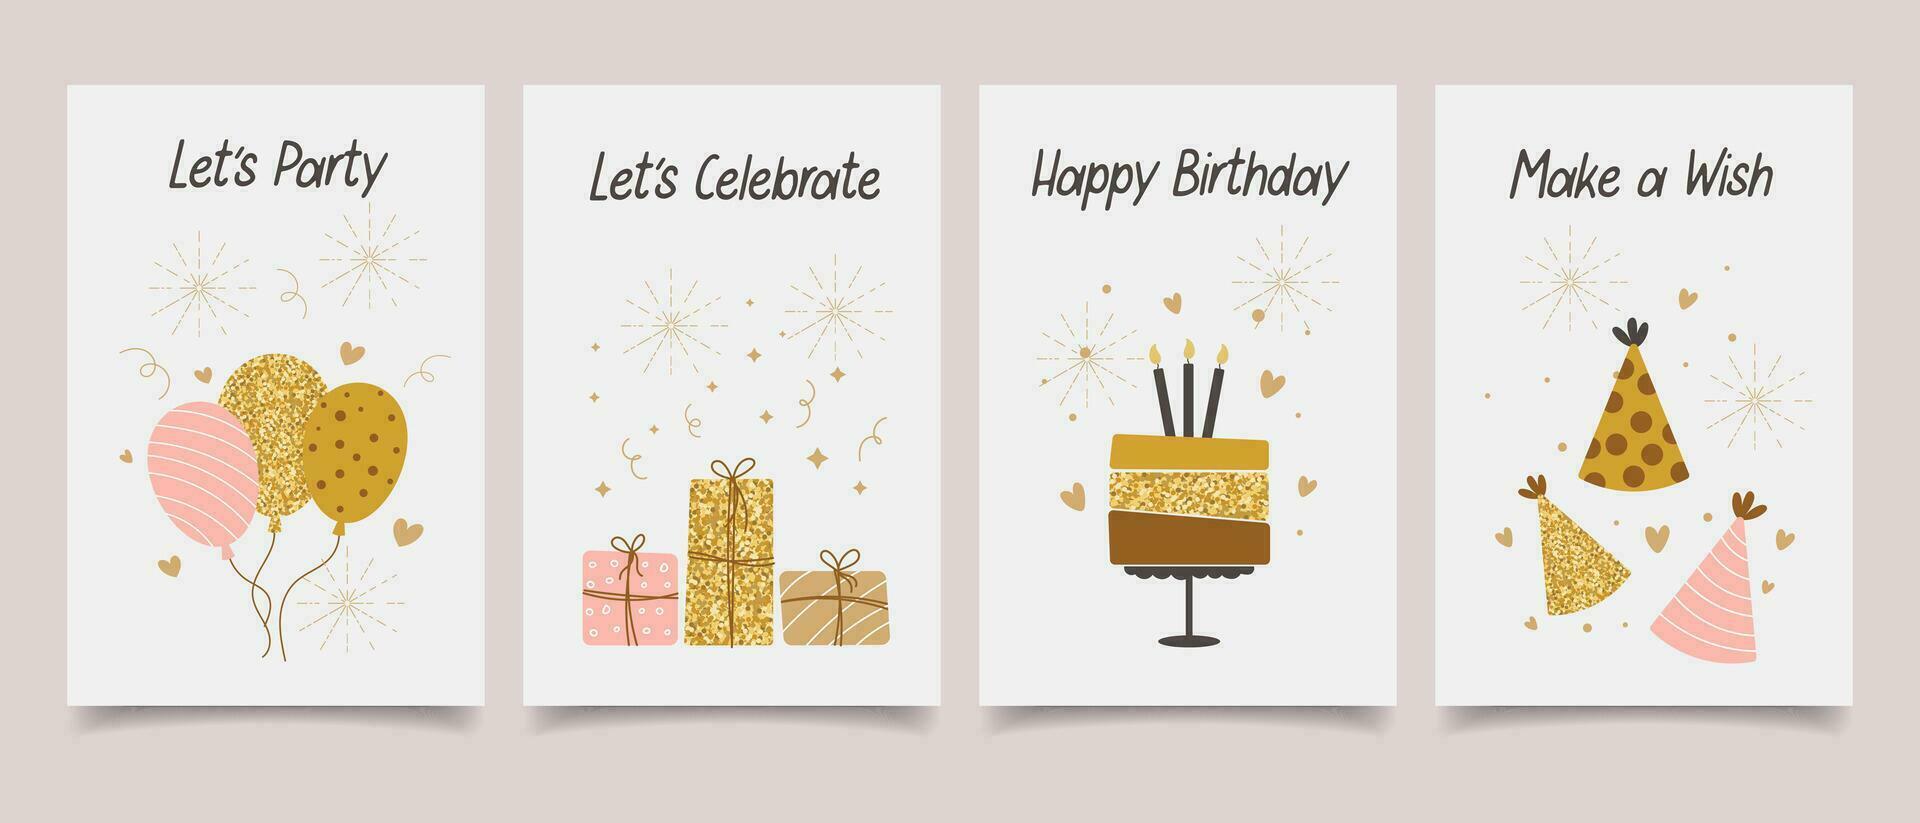 Happy birthday. Set of greeting cards with cakes, balloons, gifts and party hats with calligraphy. Cute congratulations templates in a simple style. Vector